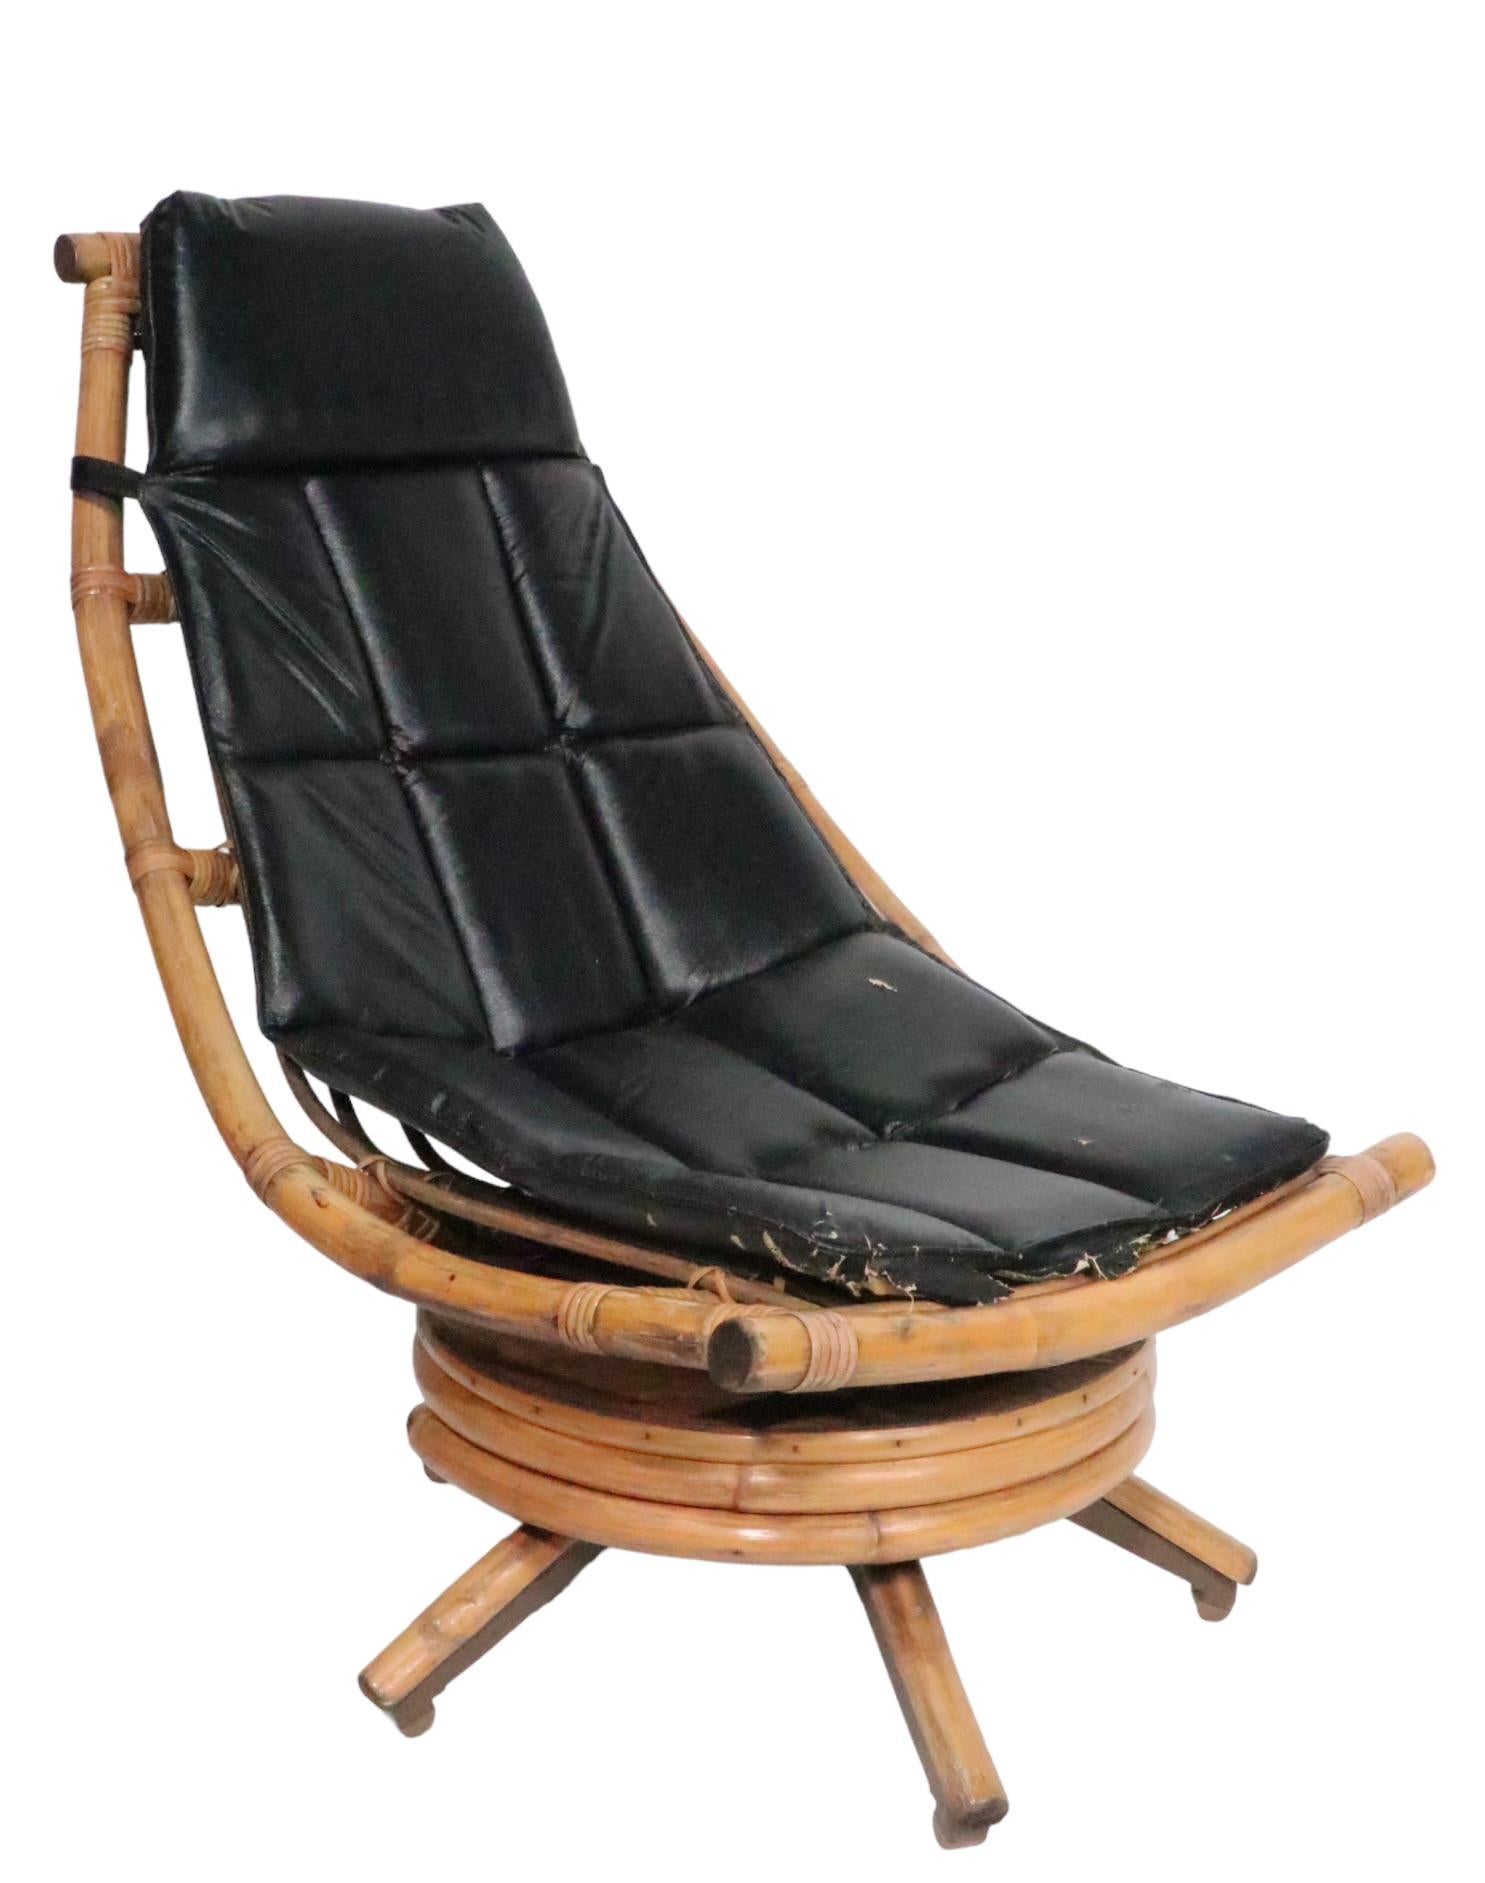 Midcentury Swivel Tilt Bamboo Lounge Chaise Chair, circa 1950/ 1960s For Sale 7